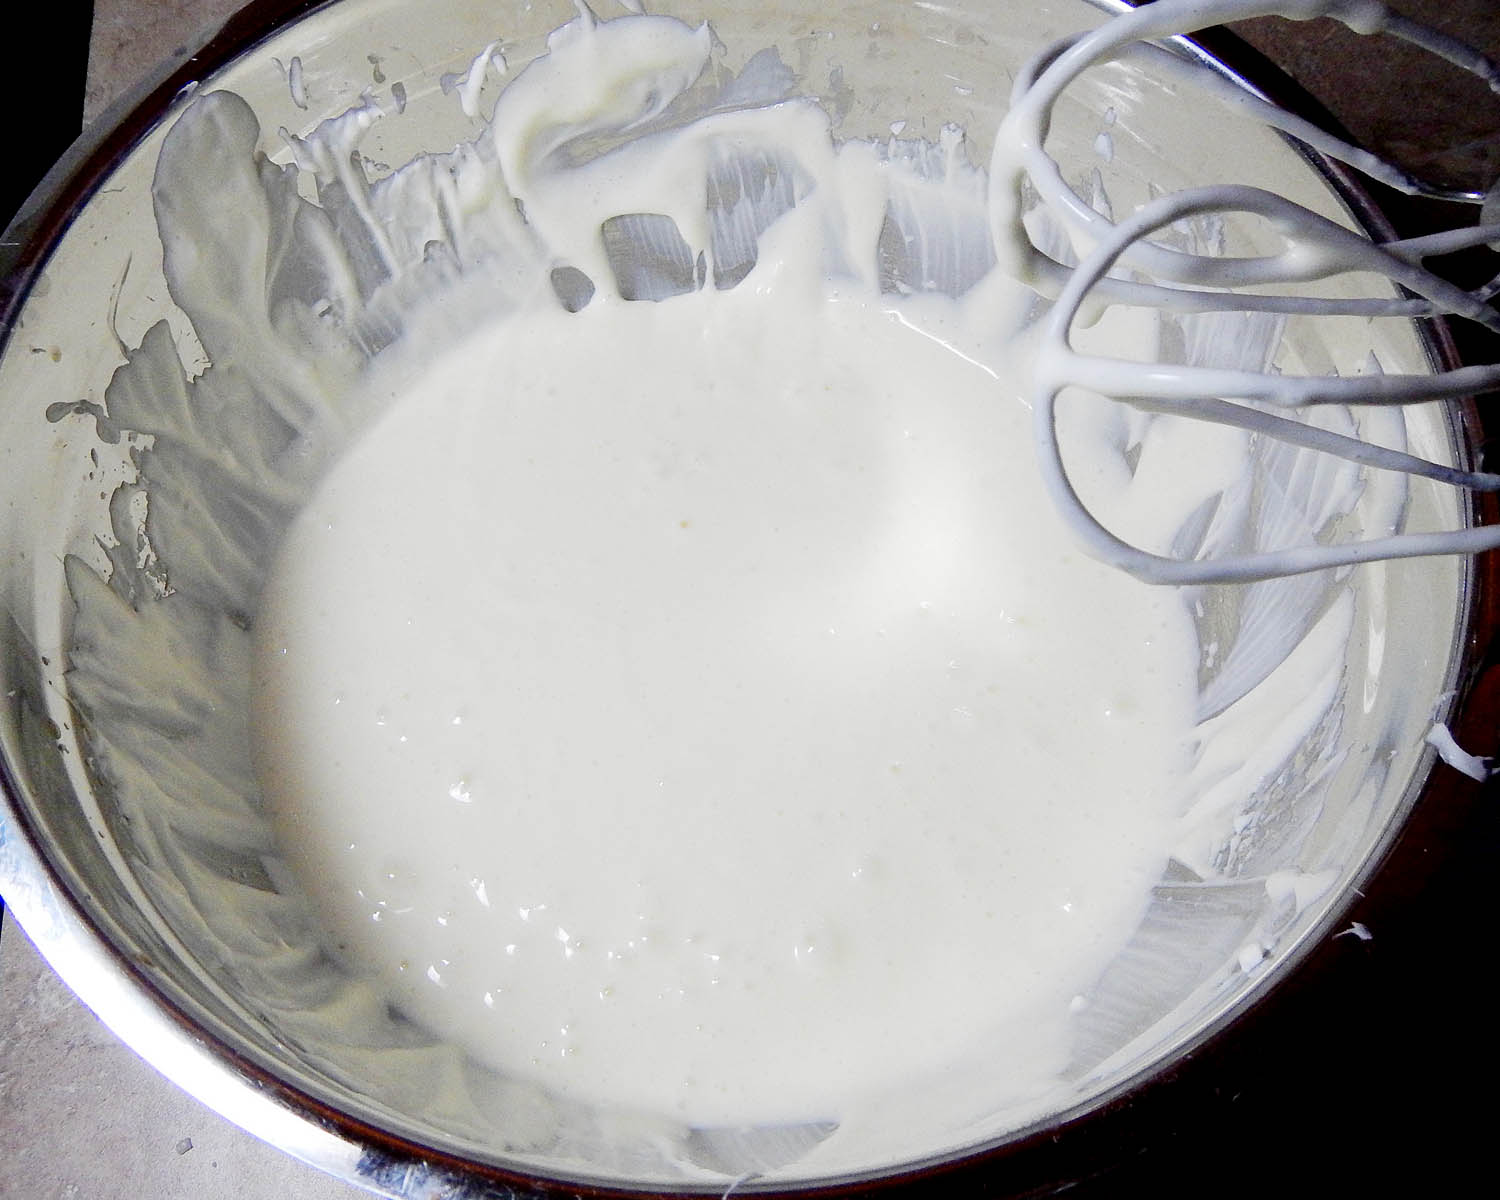 Coconut Cheesecake Batter